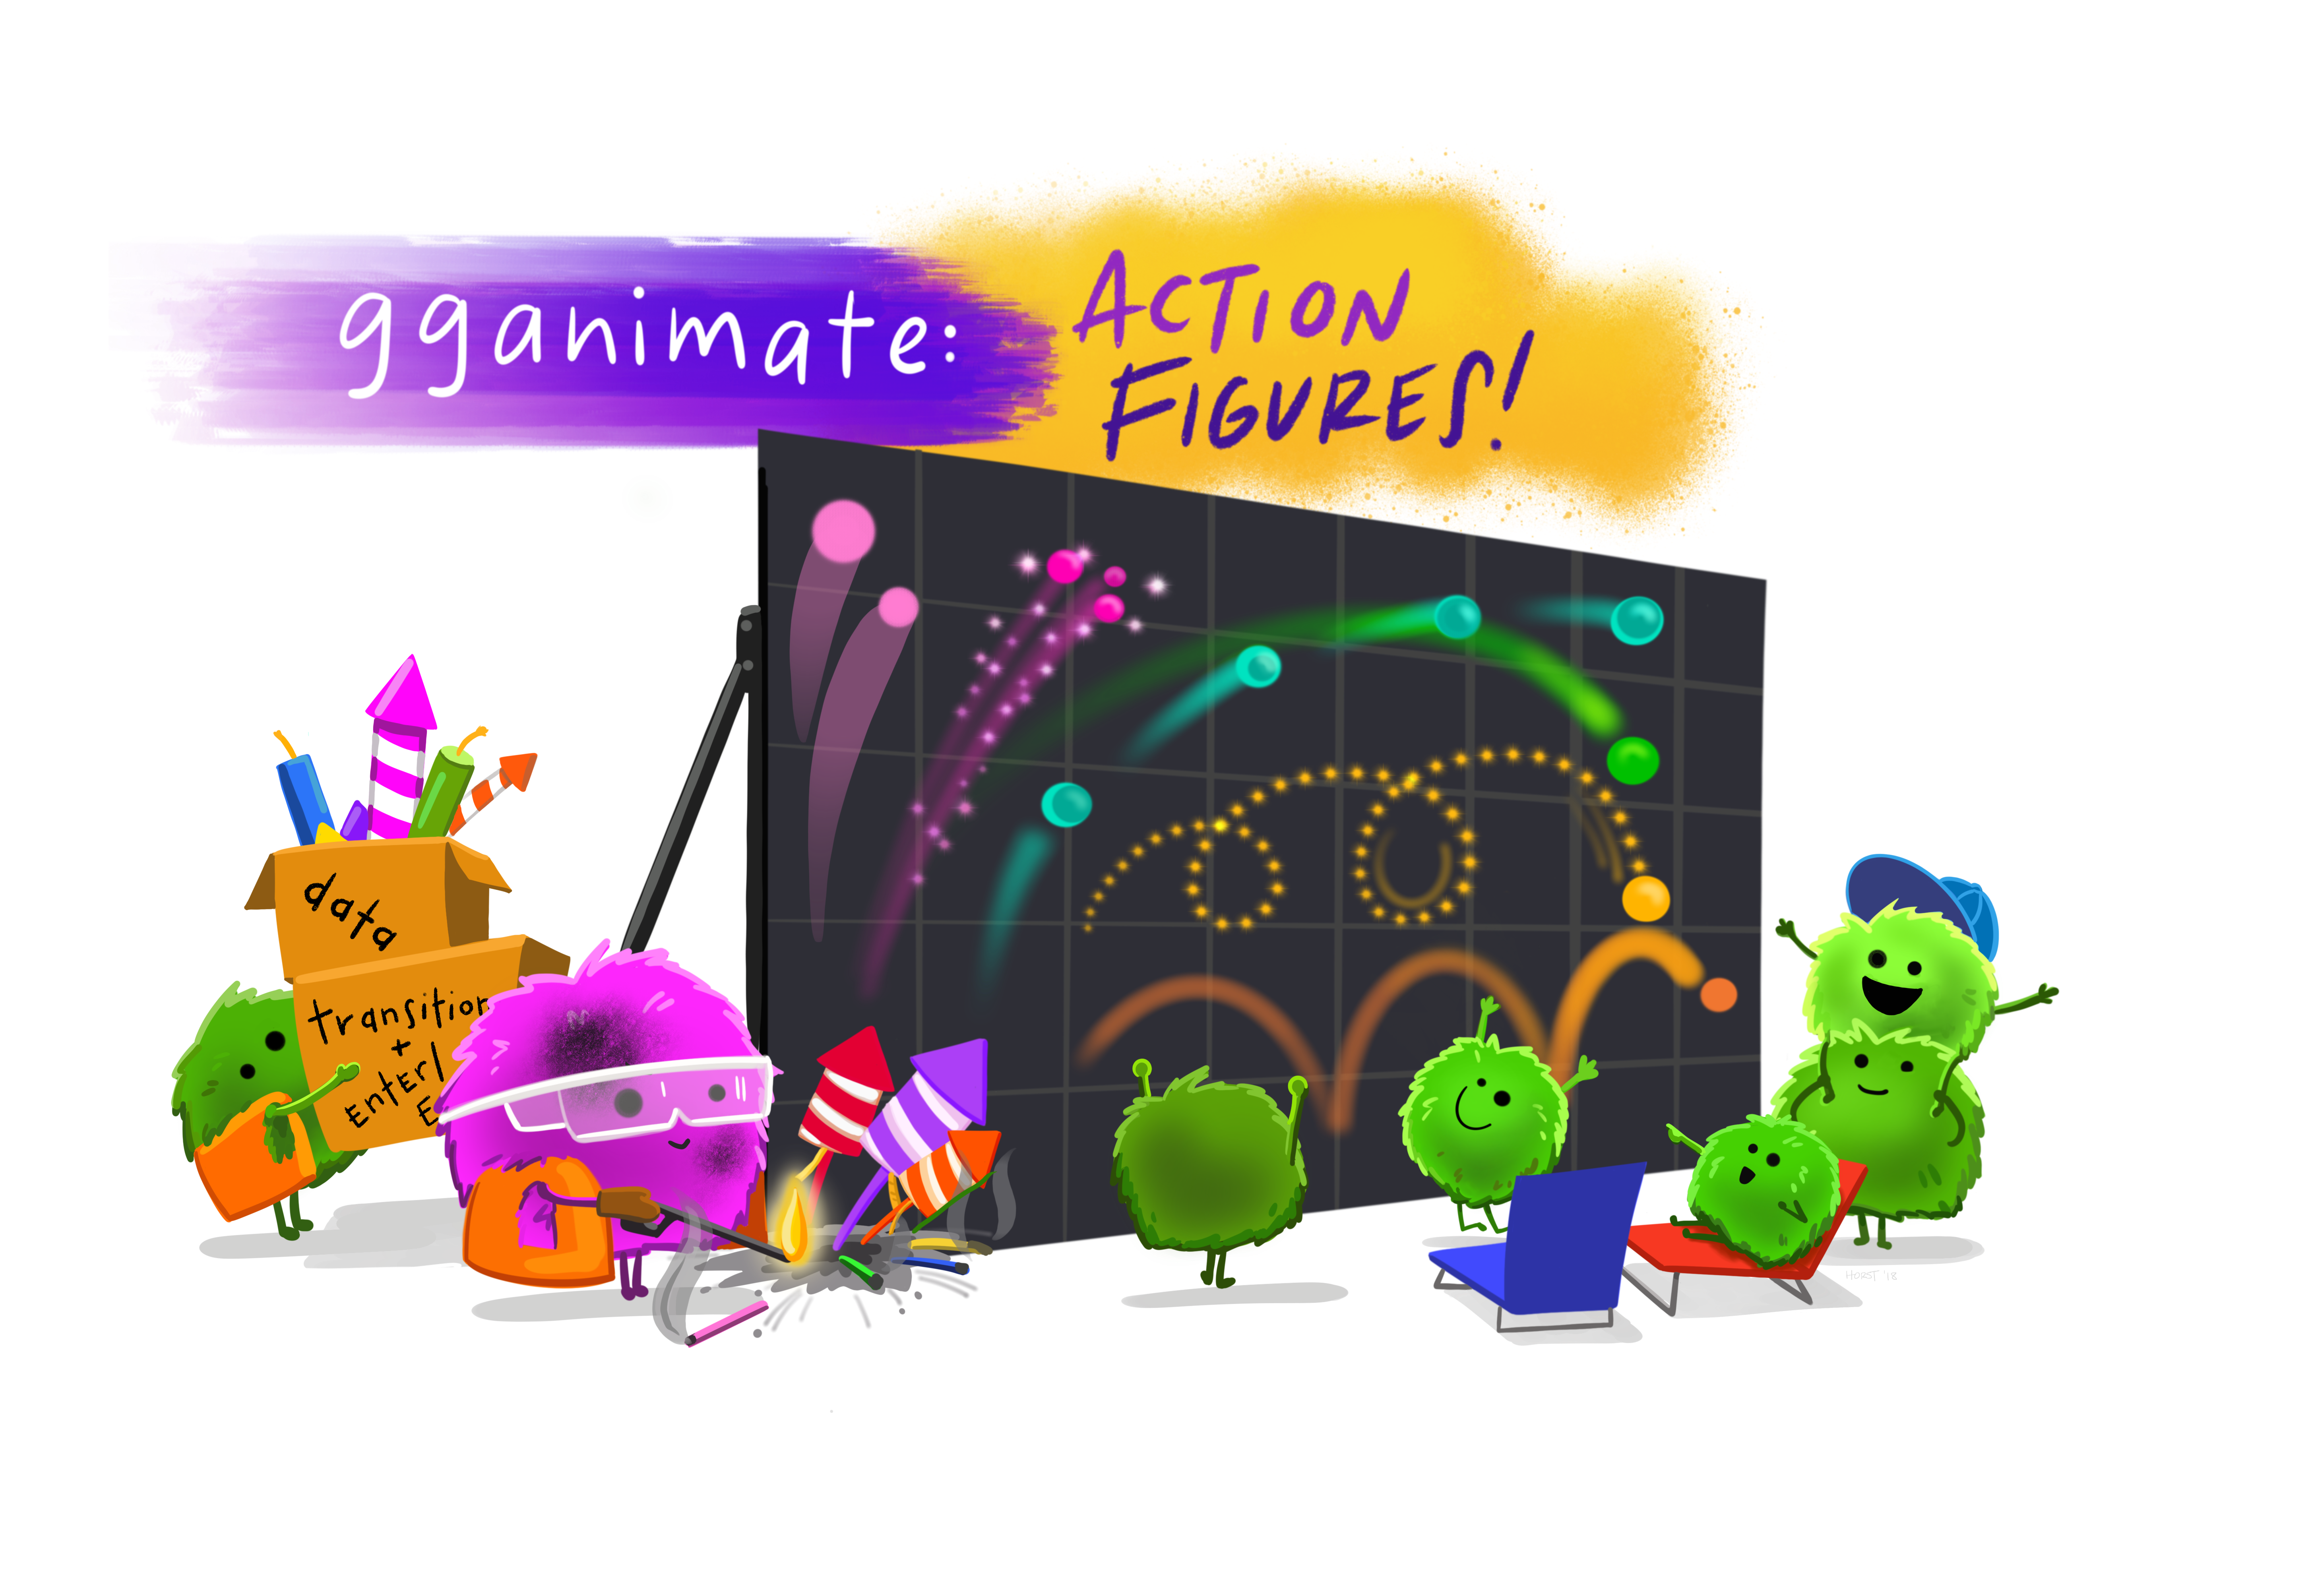 Cartoon of a bunch of monsters watching data points of varing color and shape fly across a screen like fireworks. Several monsters are lighting the data off like fireworks. Stylized text reads “gganimate: action figures!”